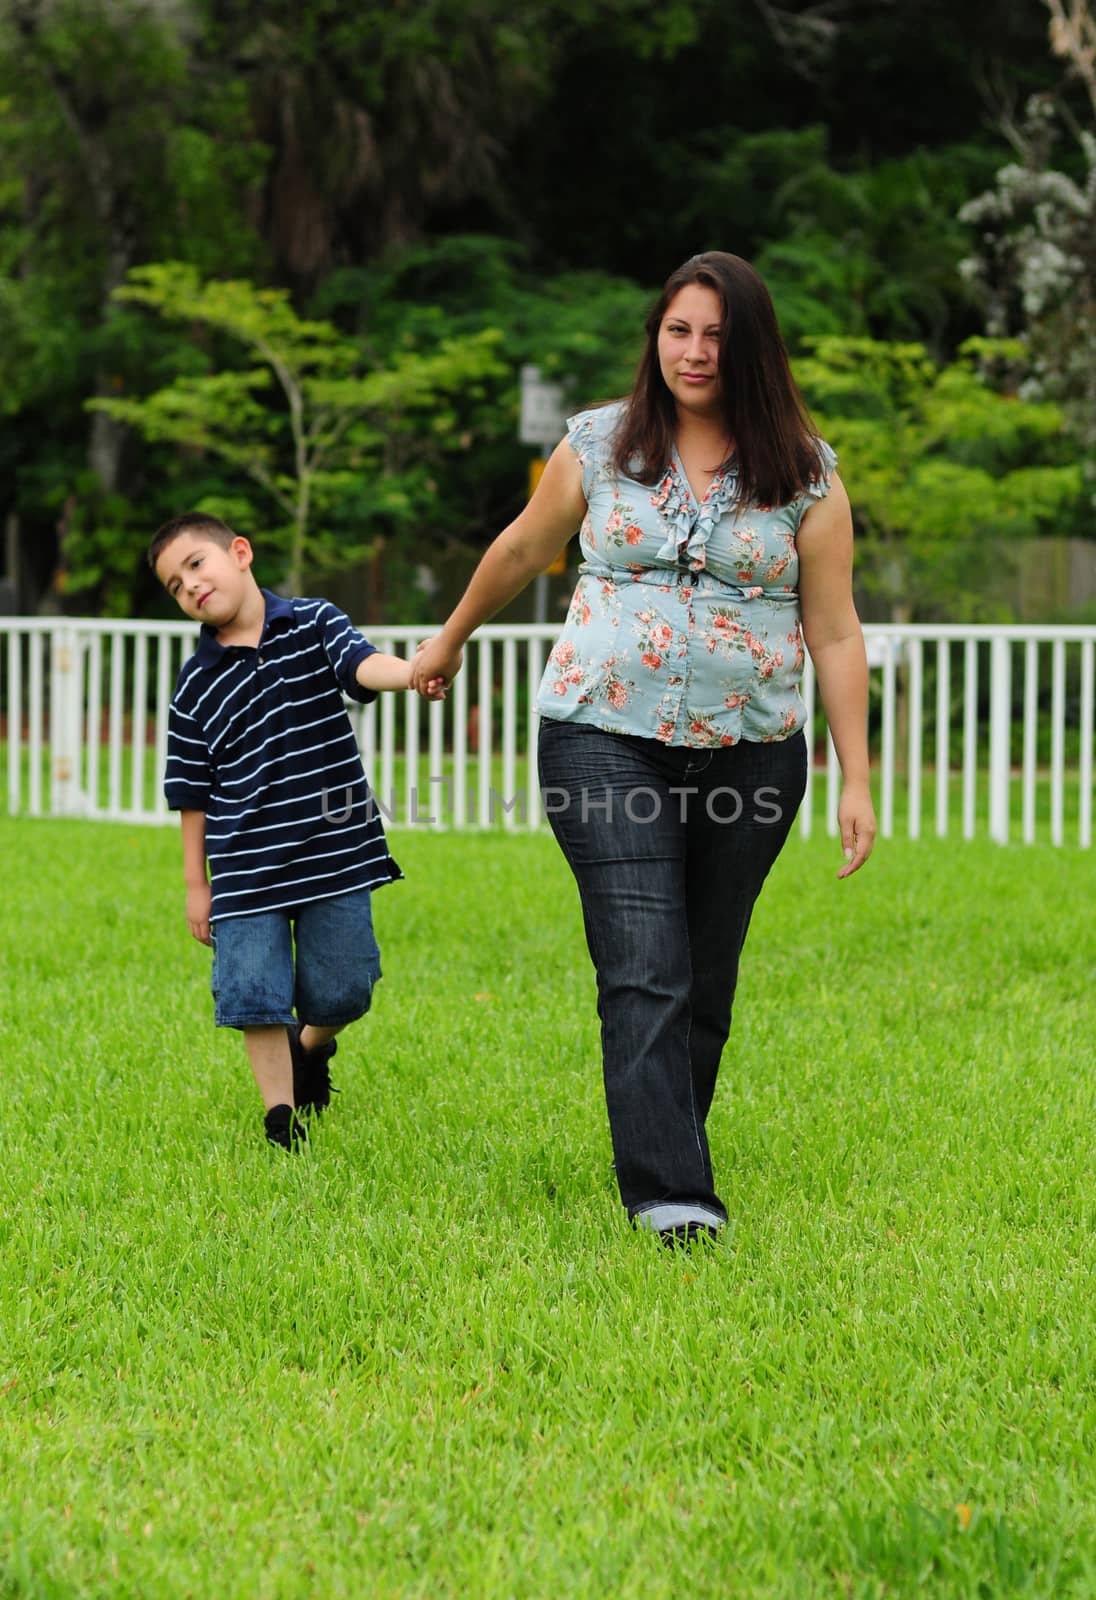 naughty young child in trouble with mother and dragging feet